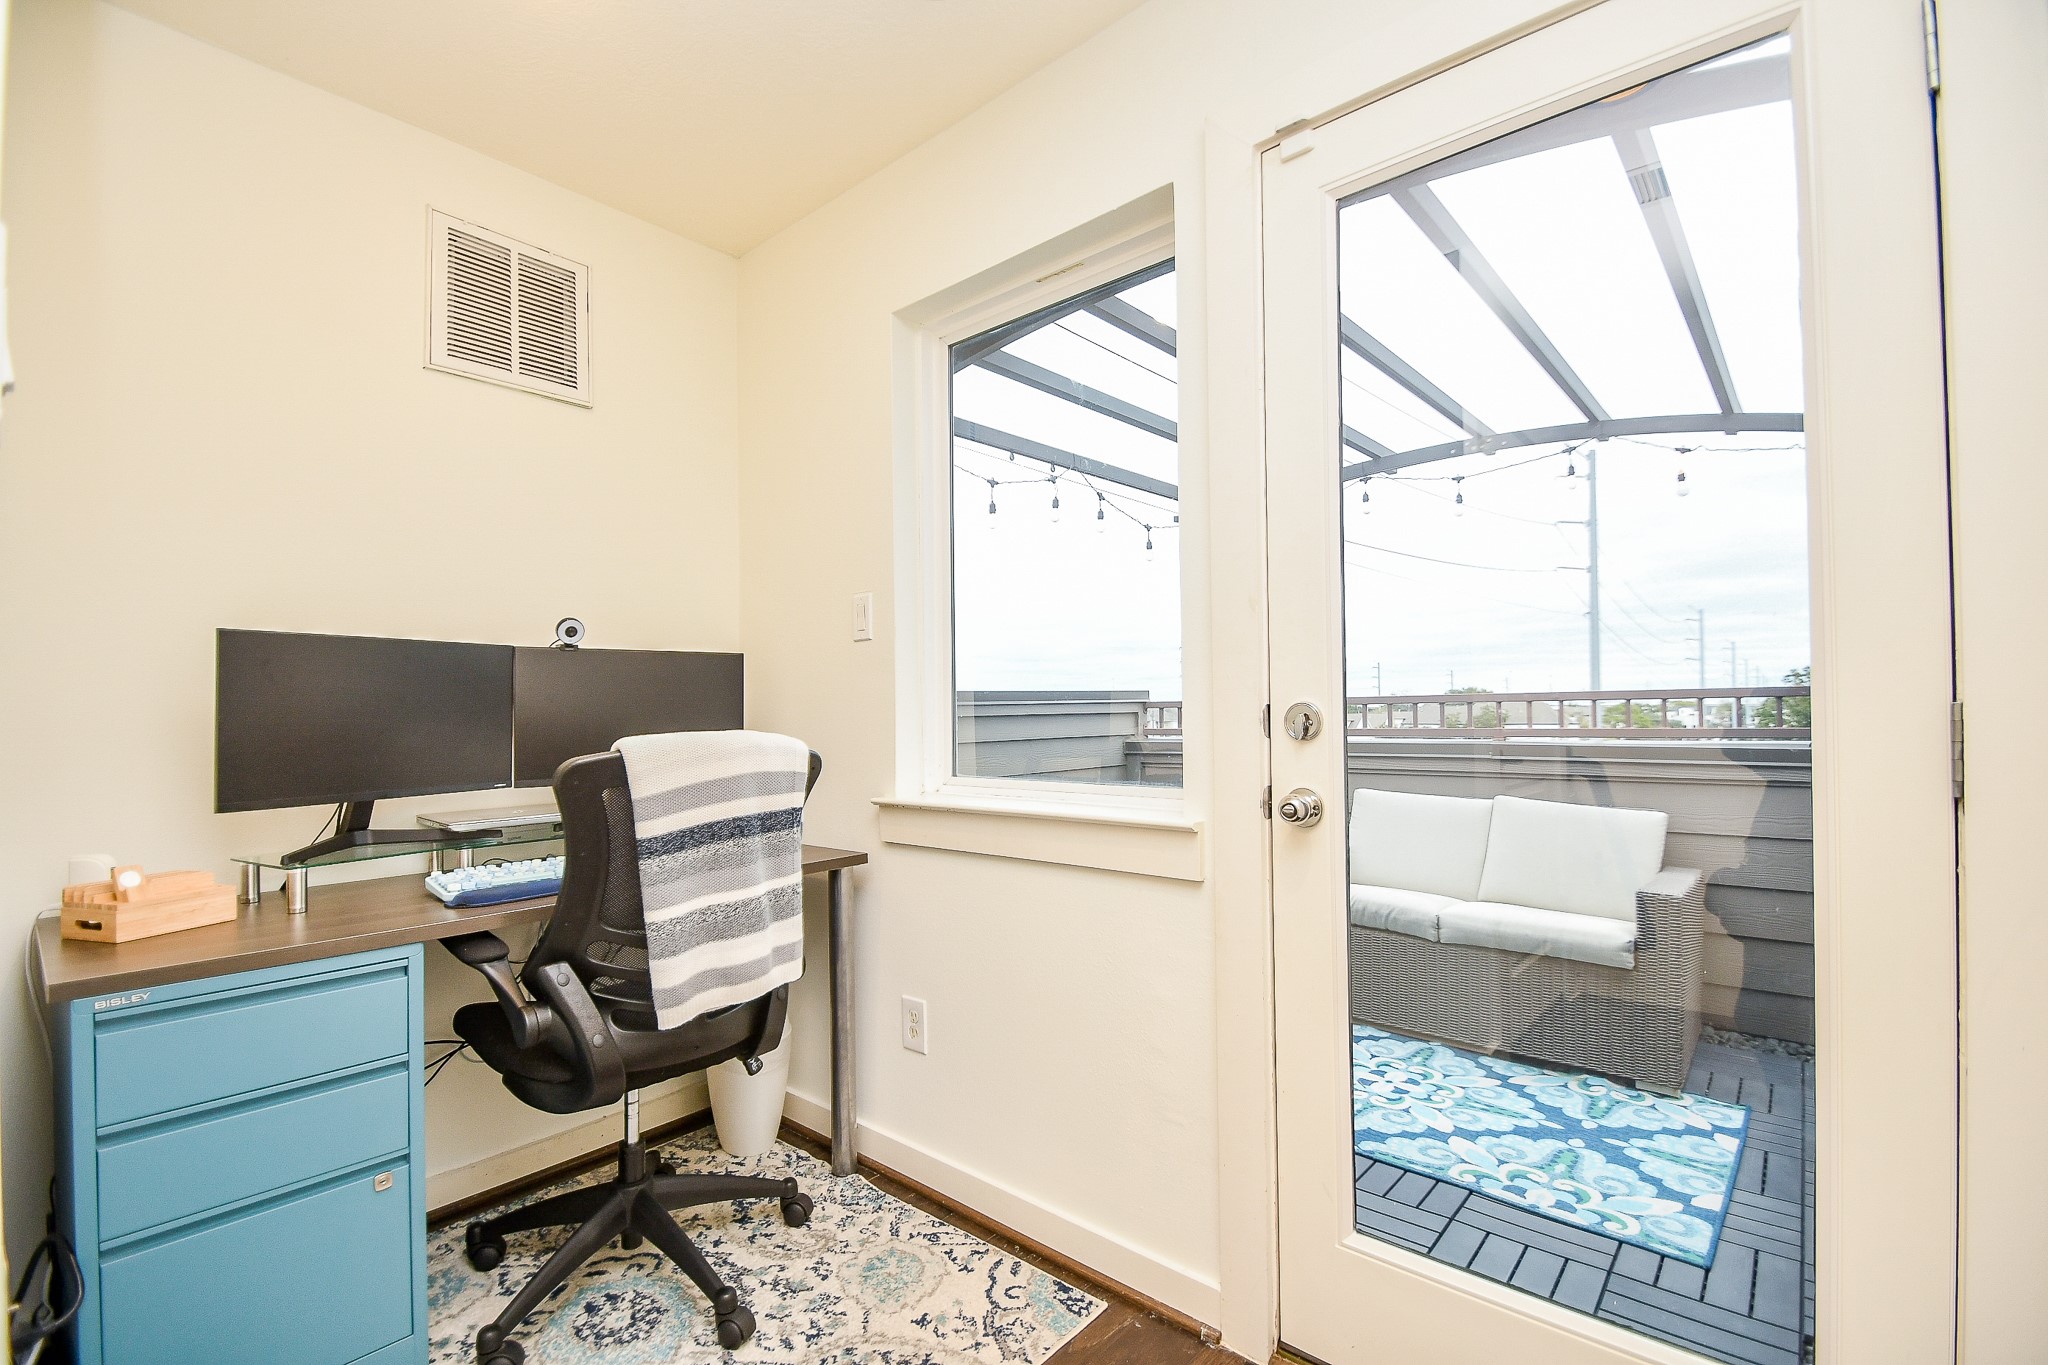 The top floor features a study area perfect for your work from home setup! Direct access to the rooftop patio.